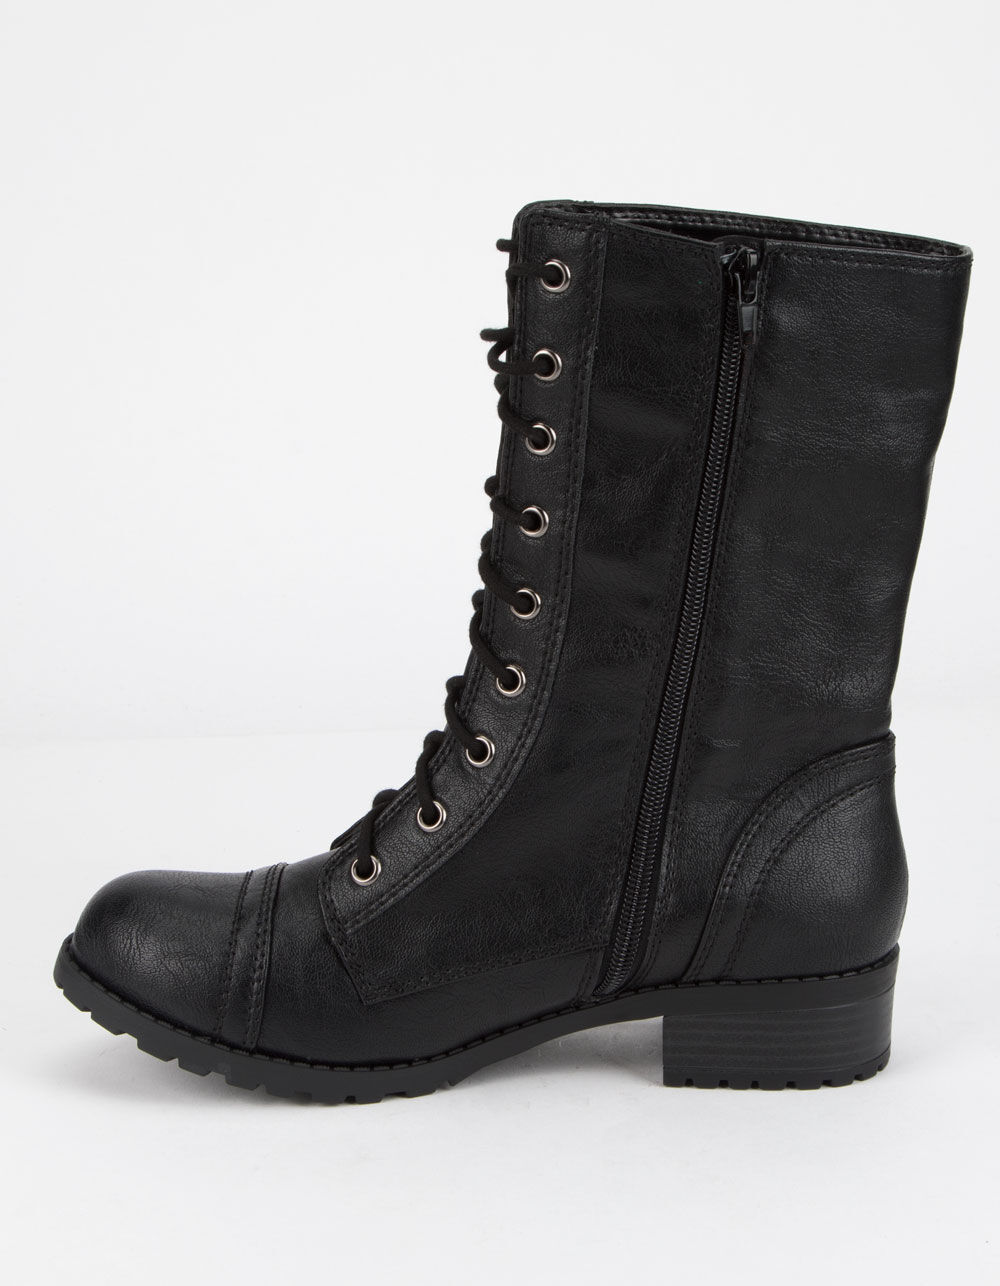 SODA Lace Up Black Womens Combat Boots - BLACK | Tillys